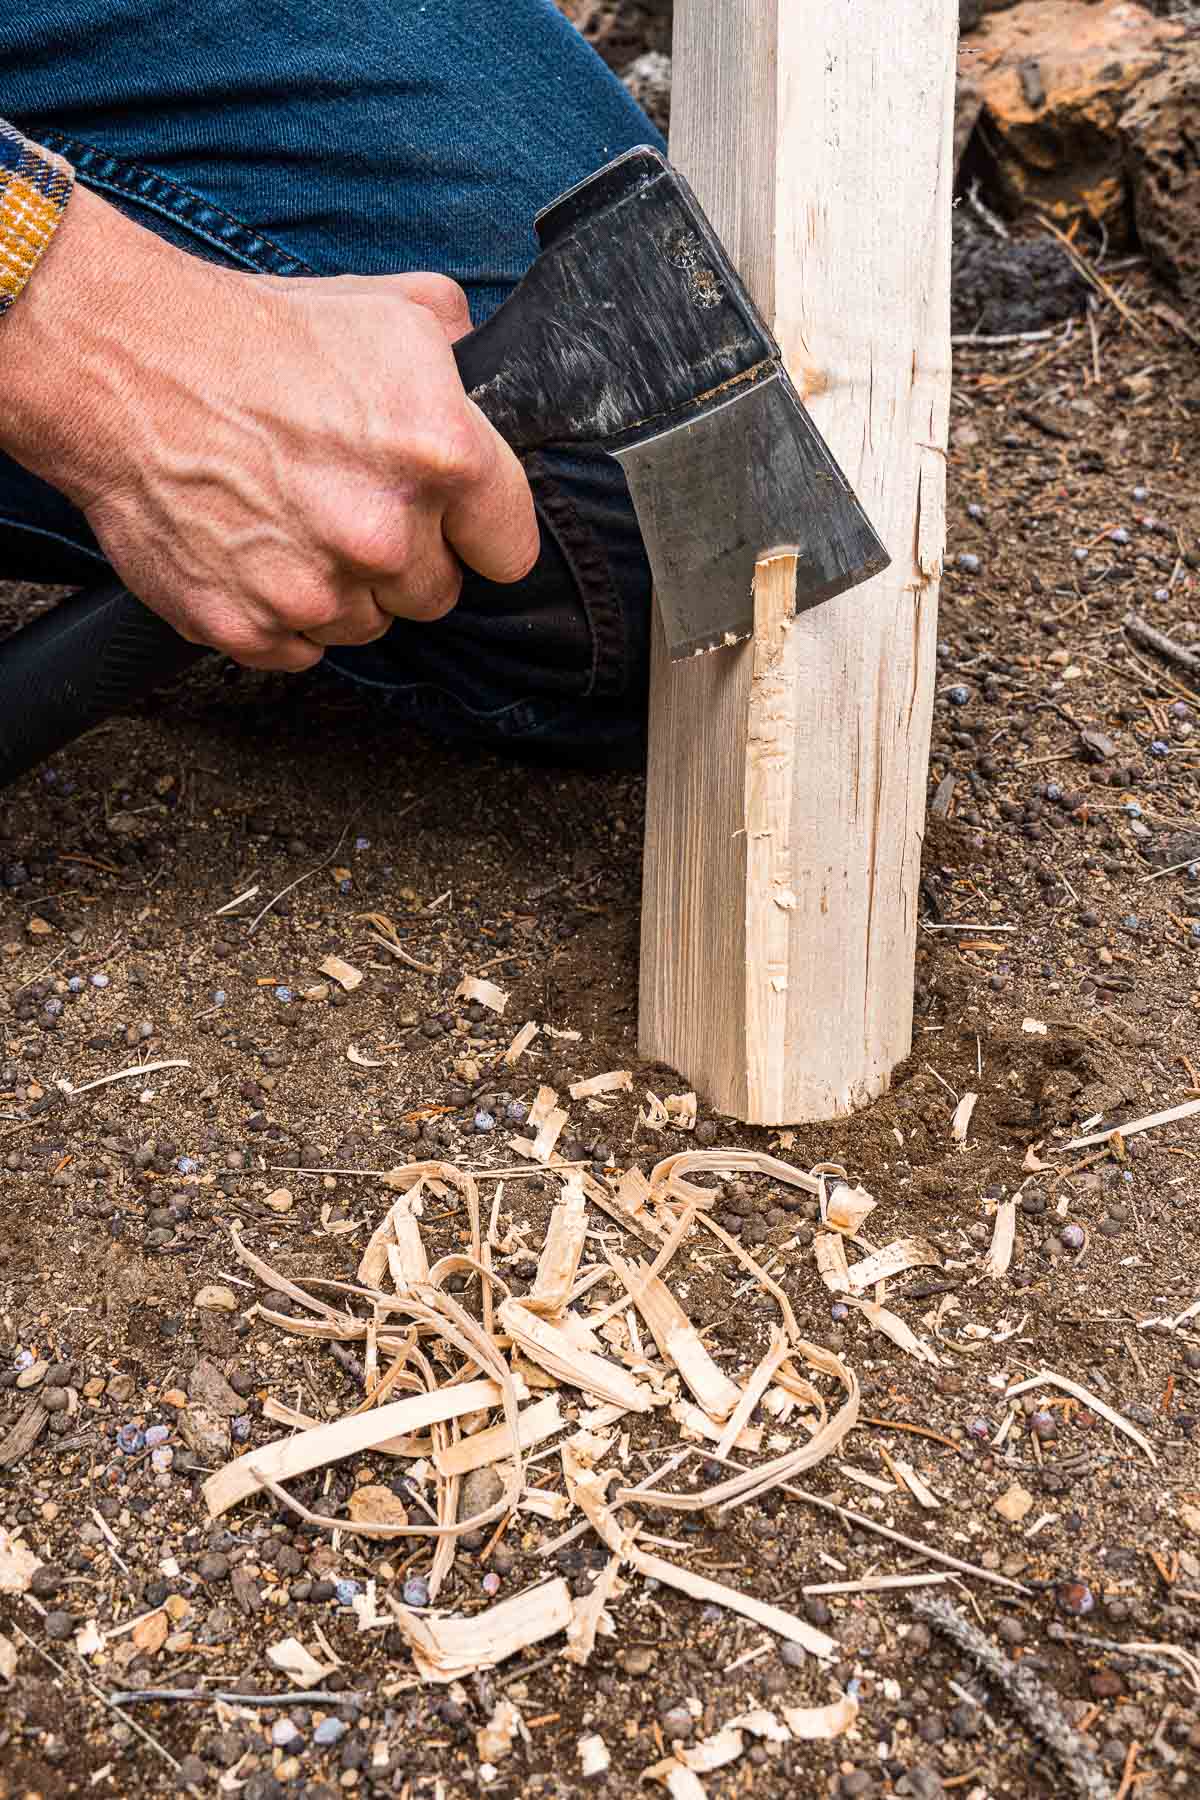 Michael using a hatchet to create tinder from a small log